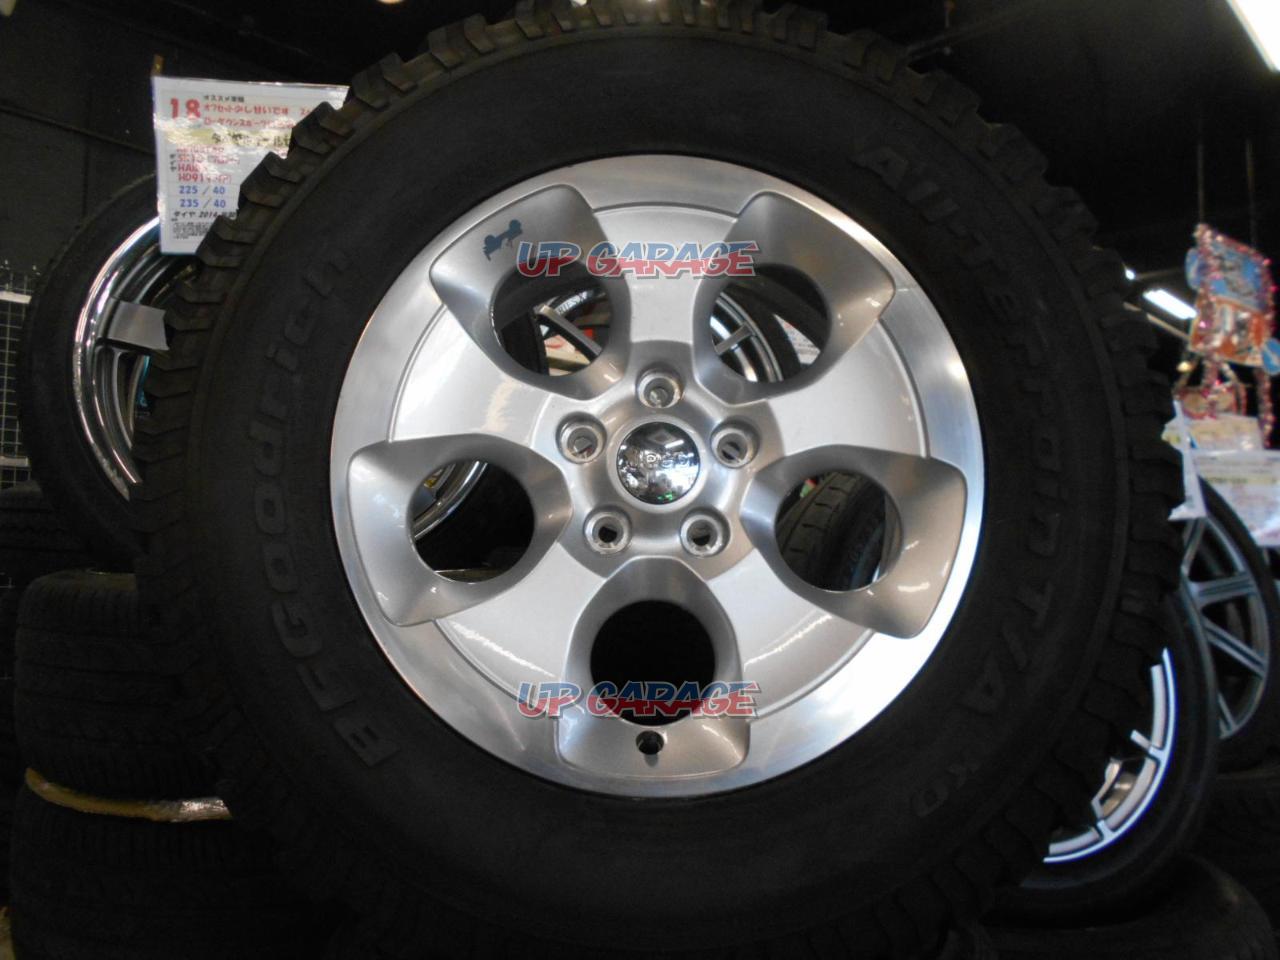 Jeep Wrangler Unlimited Sahara Previous Term Original Wheel + BFGoodrich  All-Terrain T / A Tire Is 275/65 Wide Size! +44127-5H for Sale |  Croooober